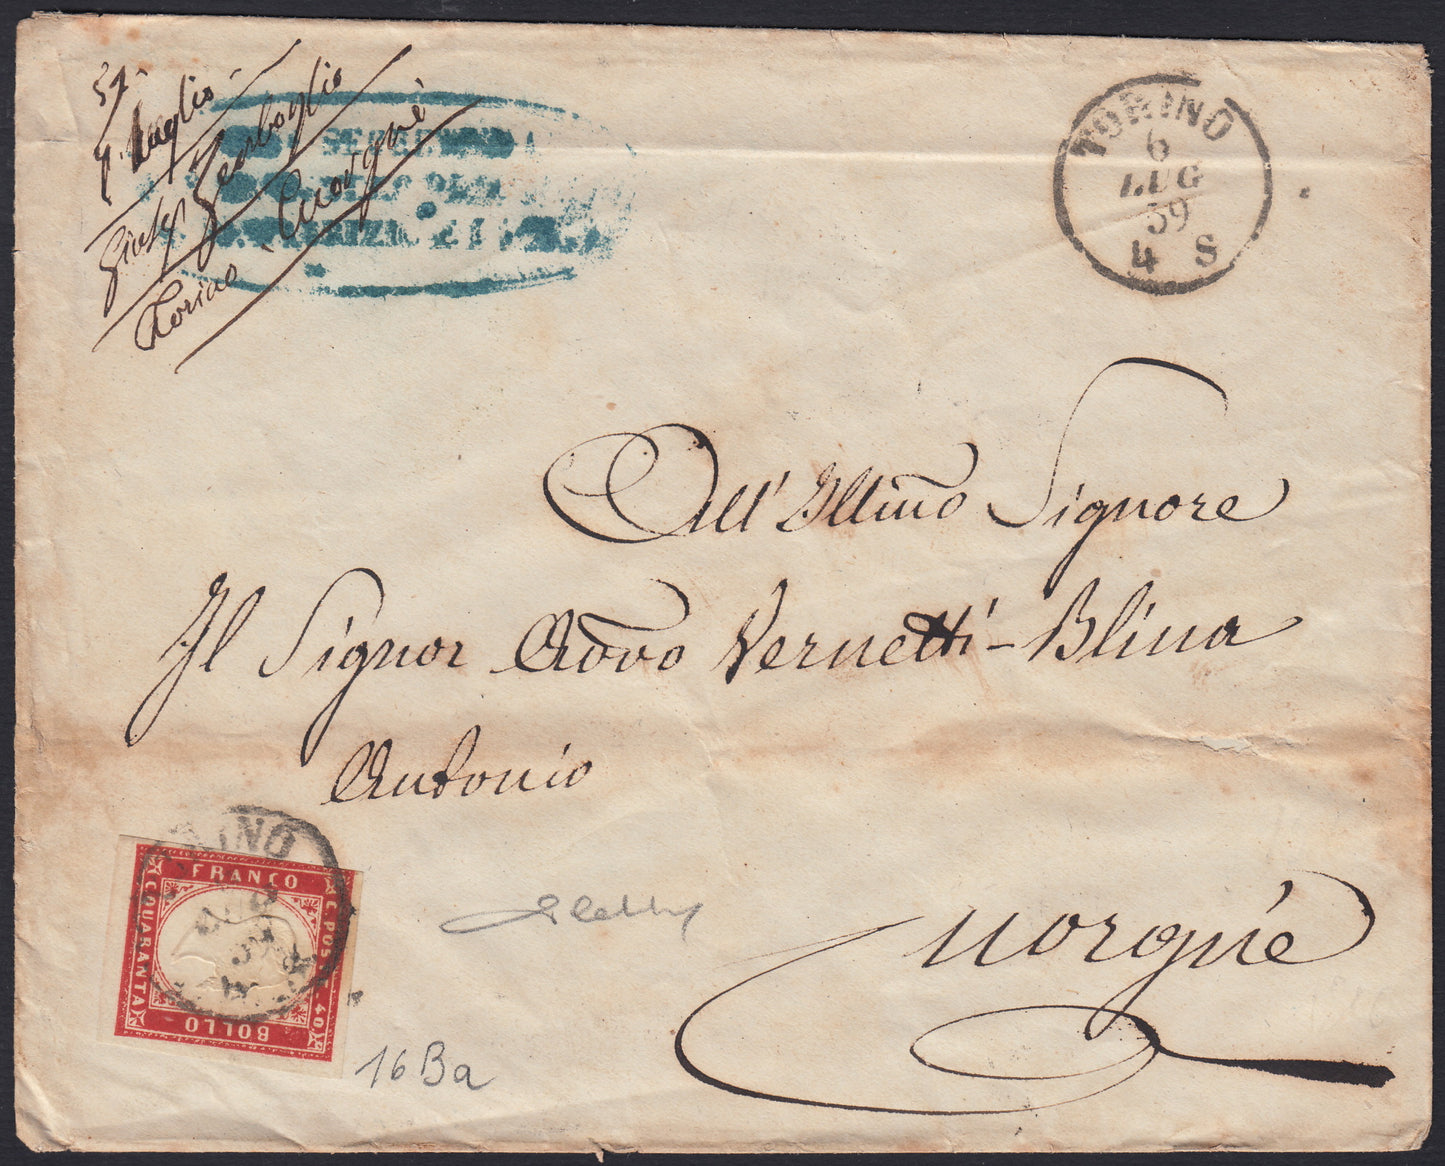 155 - 1859 - IV issue, Letter sent from Turin to Cuorgnè 6/7/59 franked with c. 40 vermilion brick edition 1859 (16Ba)